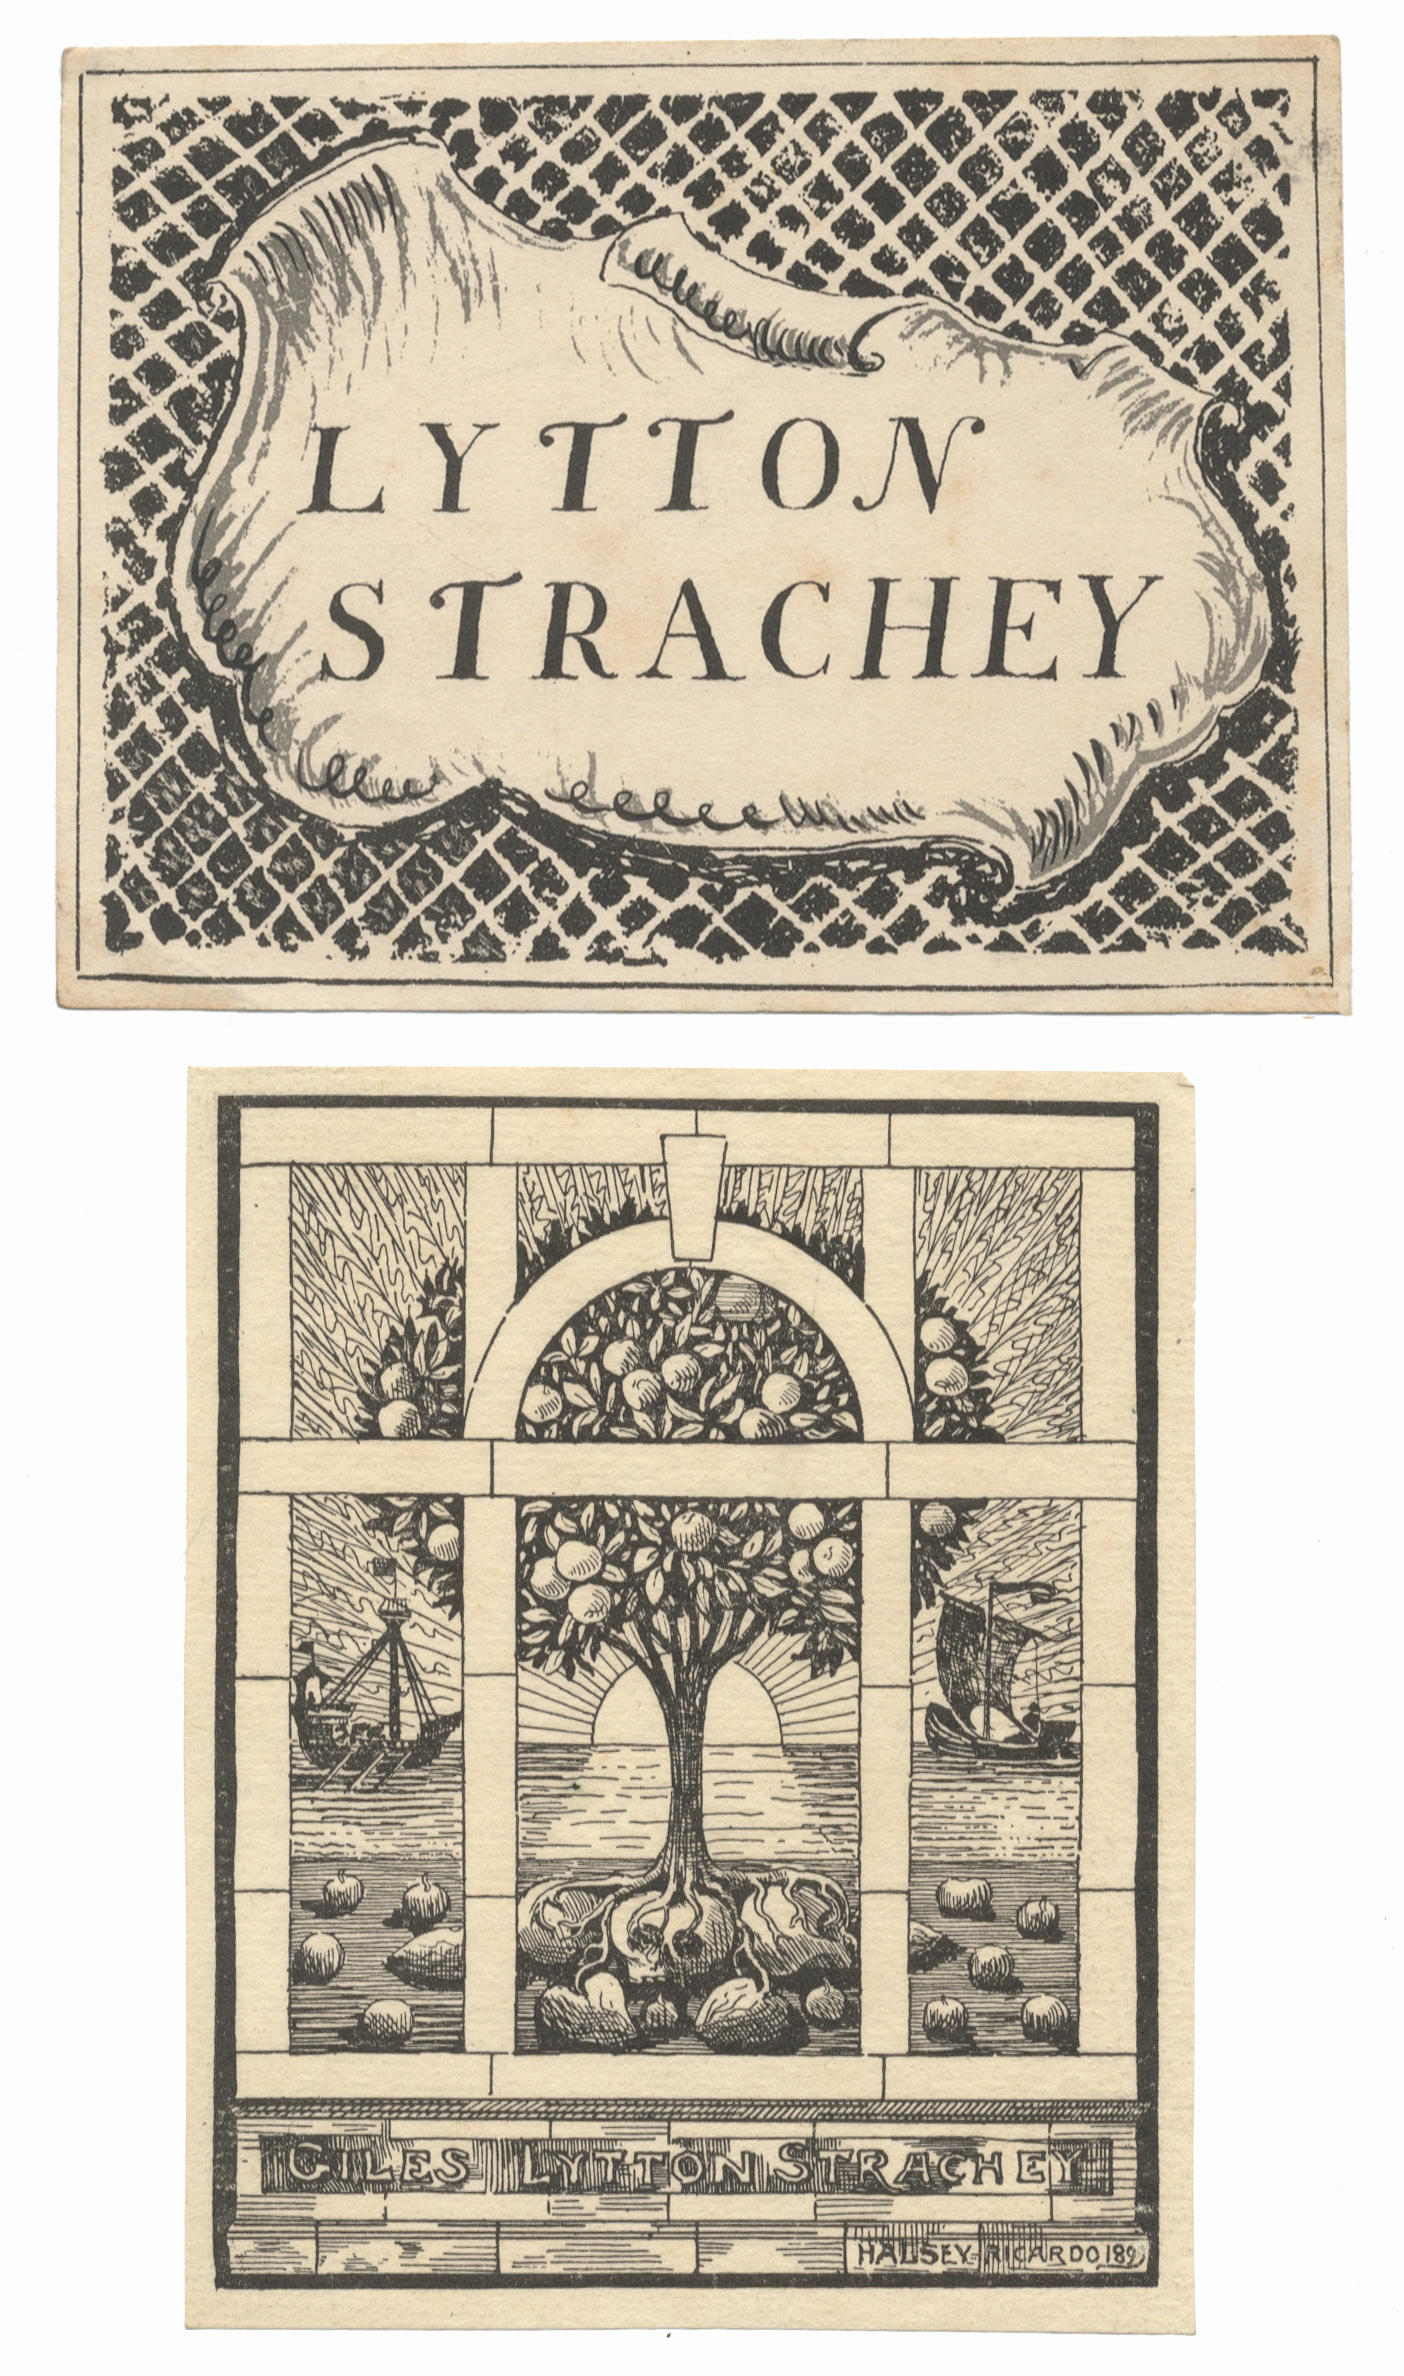 Bonhams : STRACHEY (LYTTON) Original design by Halsey Ricardo for Lytton  Strachey's first pictorial bookplate, together with examples of the printed  version, in both sizes, printed in black; and an example of